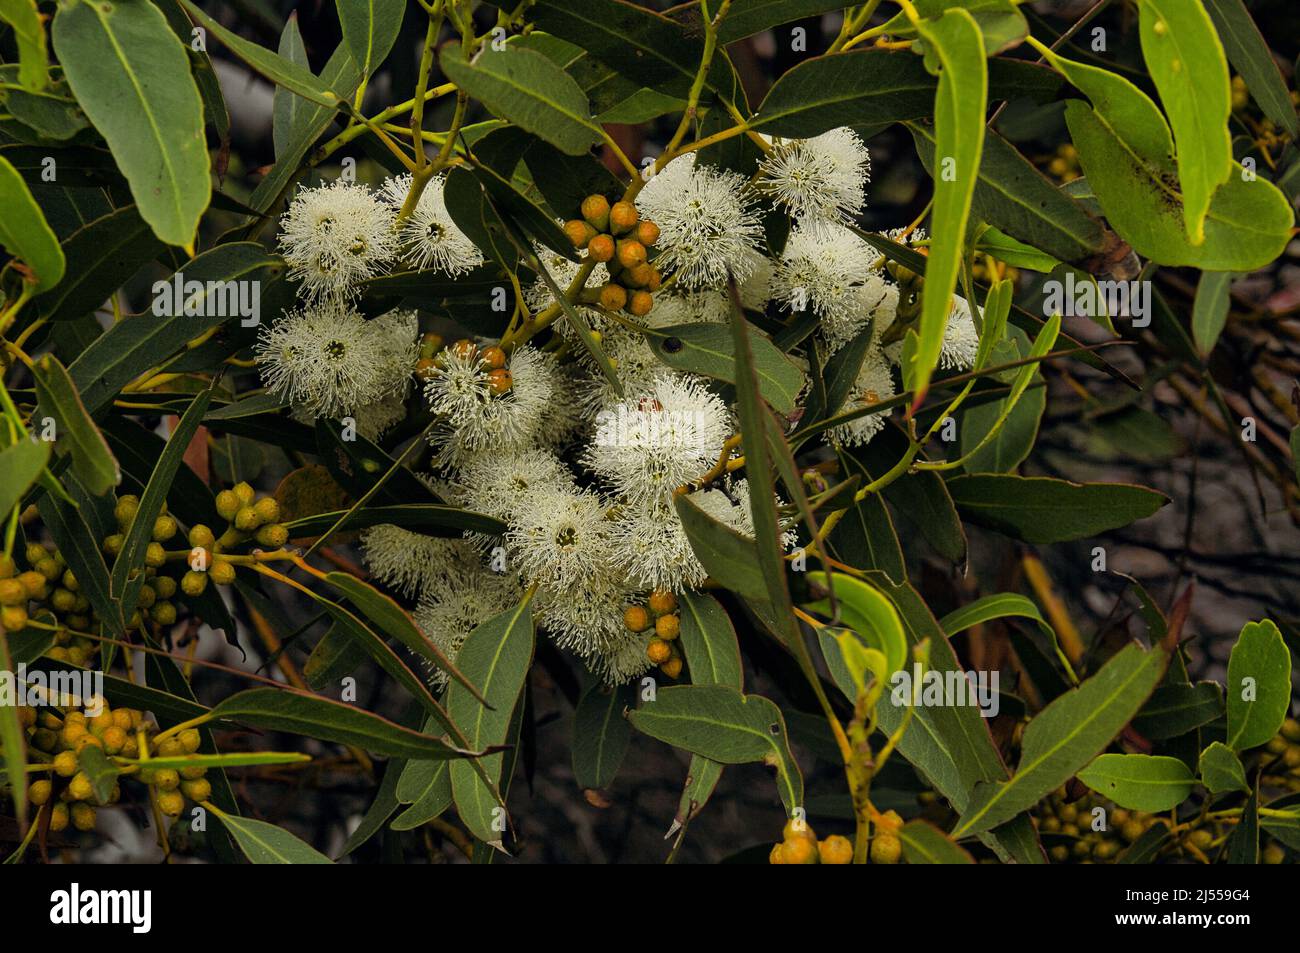 Delicate white flowers and buds of an Australian blue gum eucalyptus Stock Photo